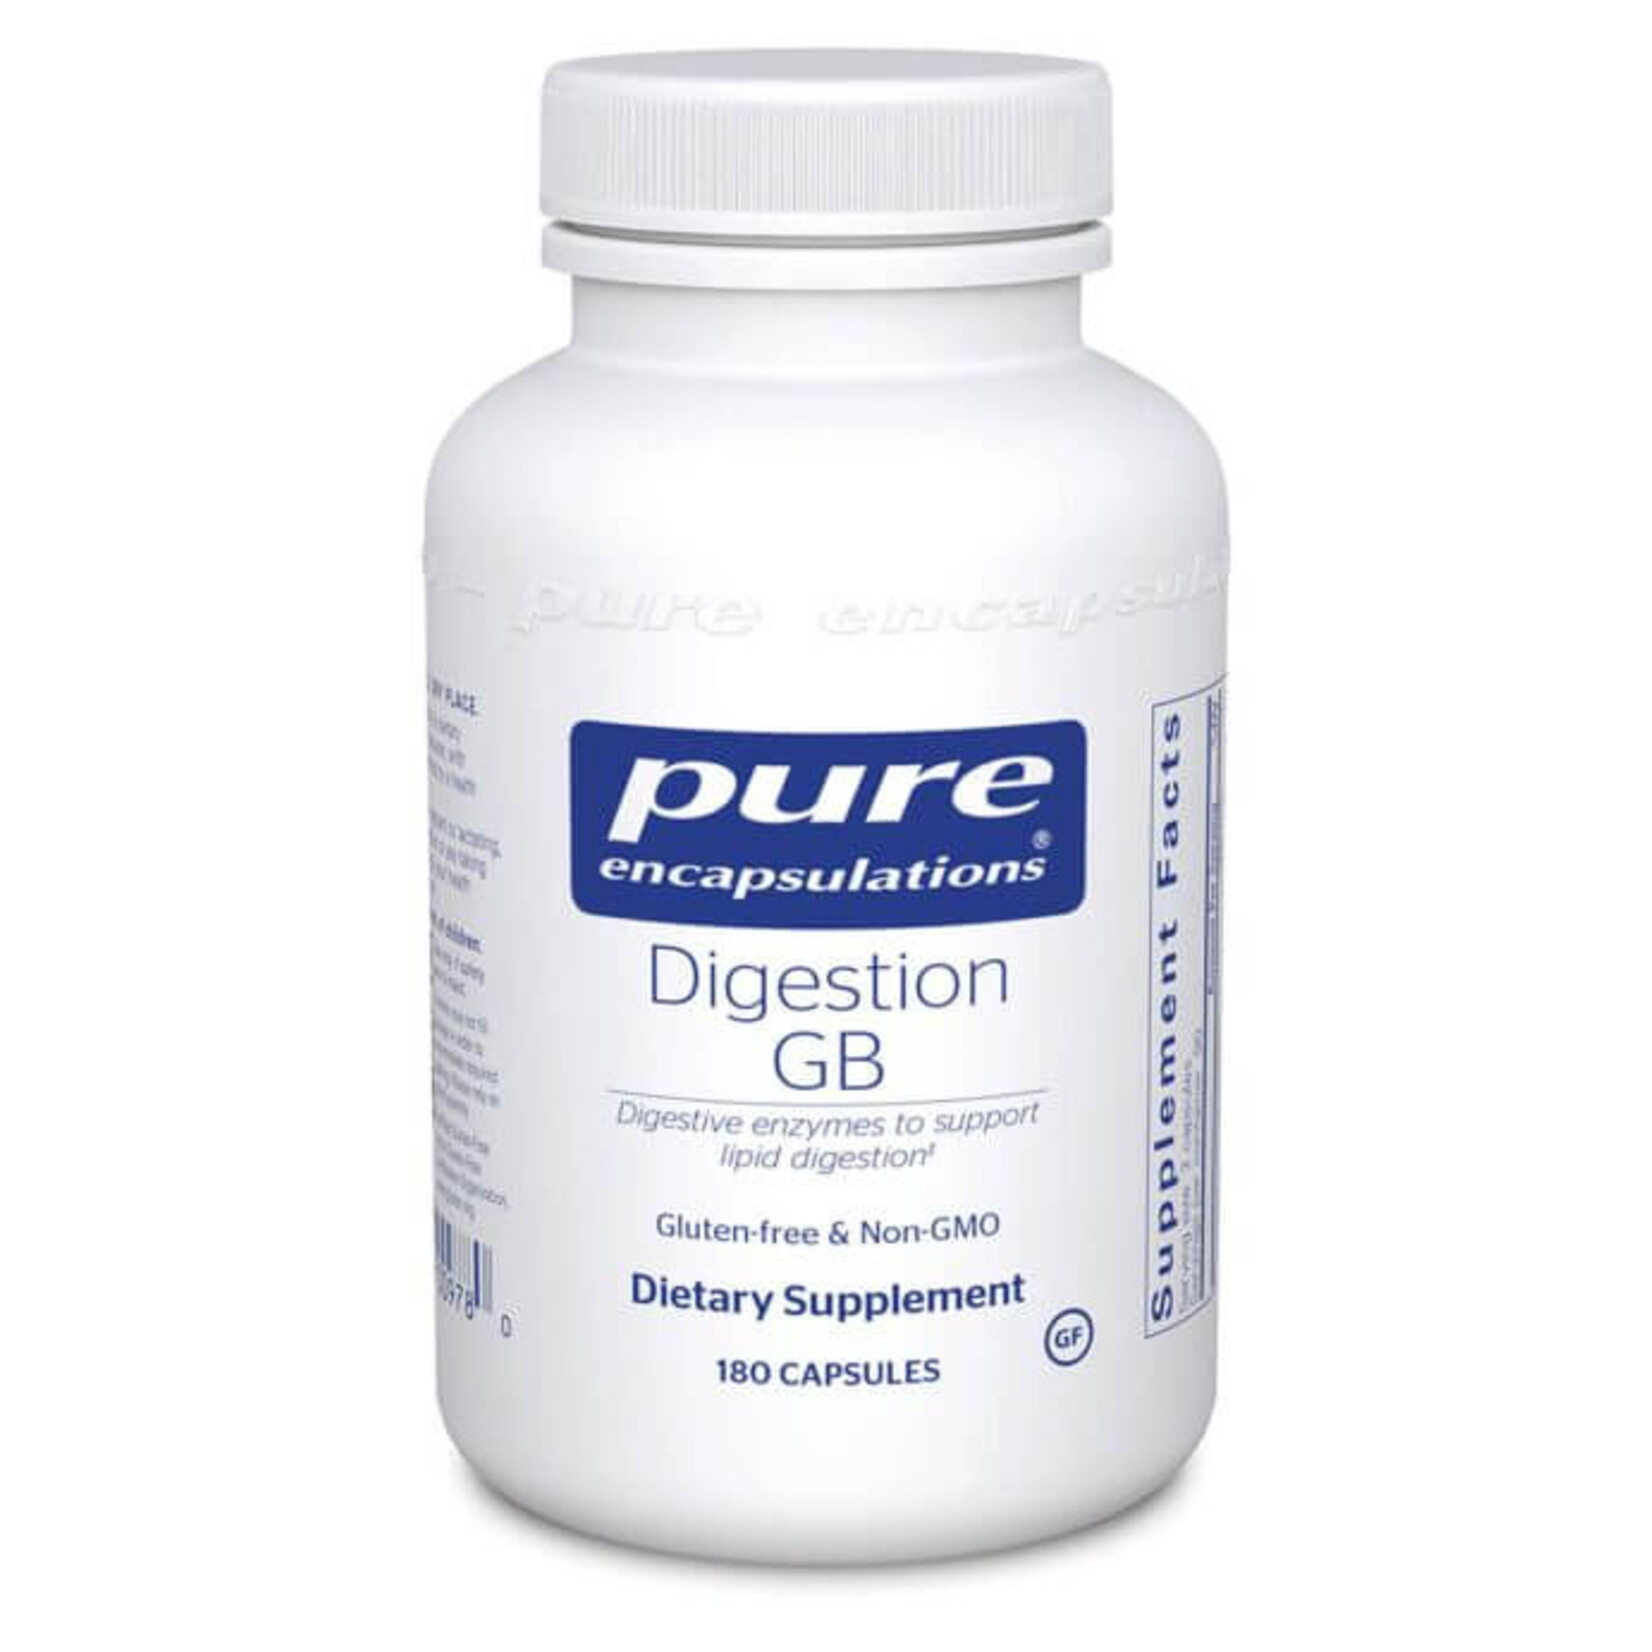 Pure Encapsulations Digestion GB (Pure)